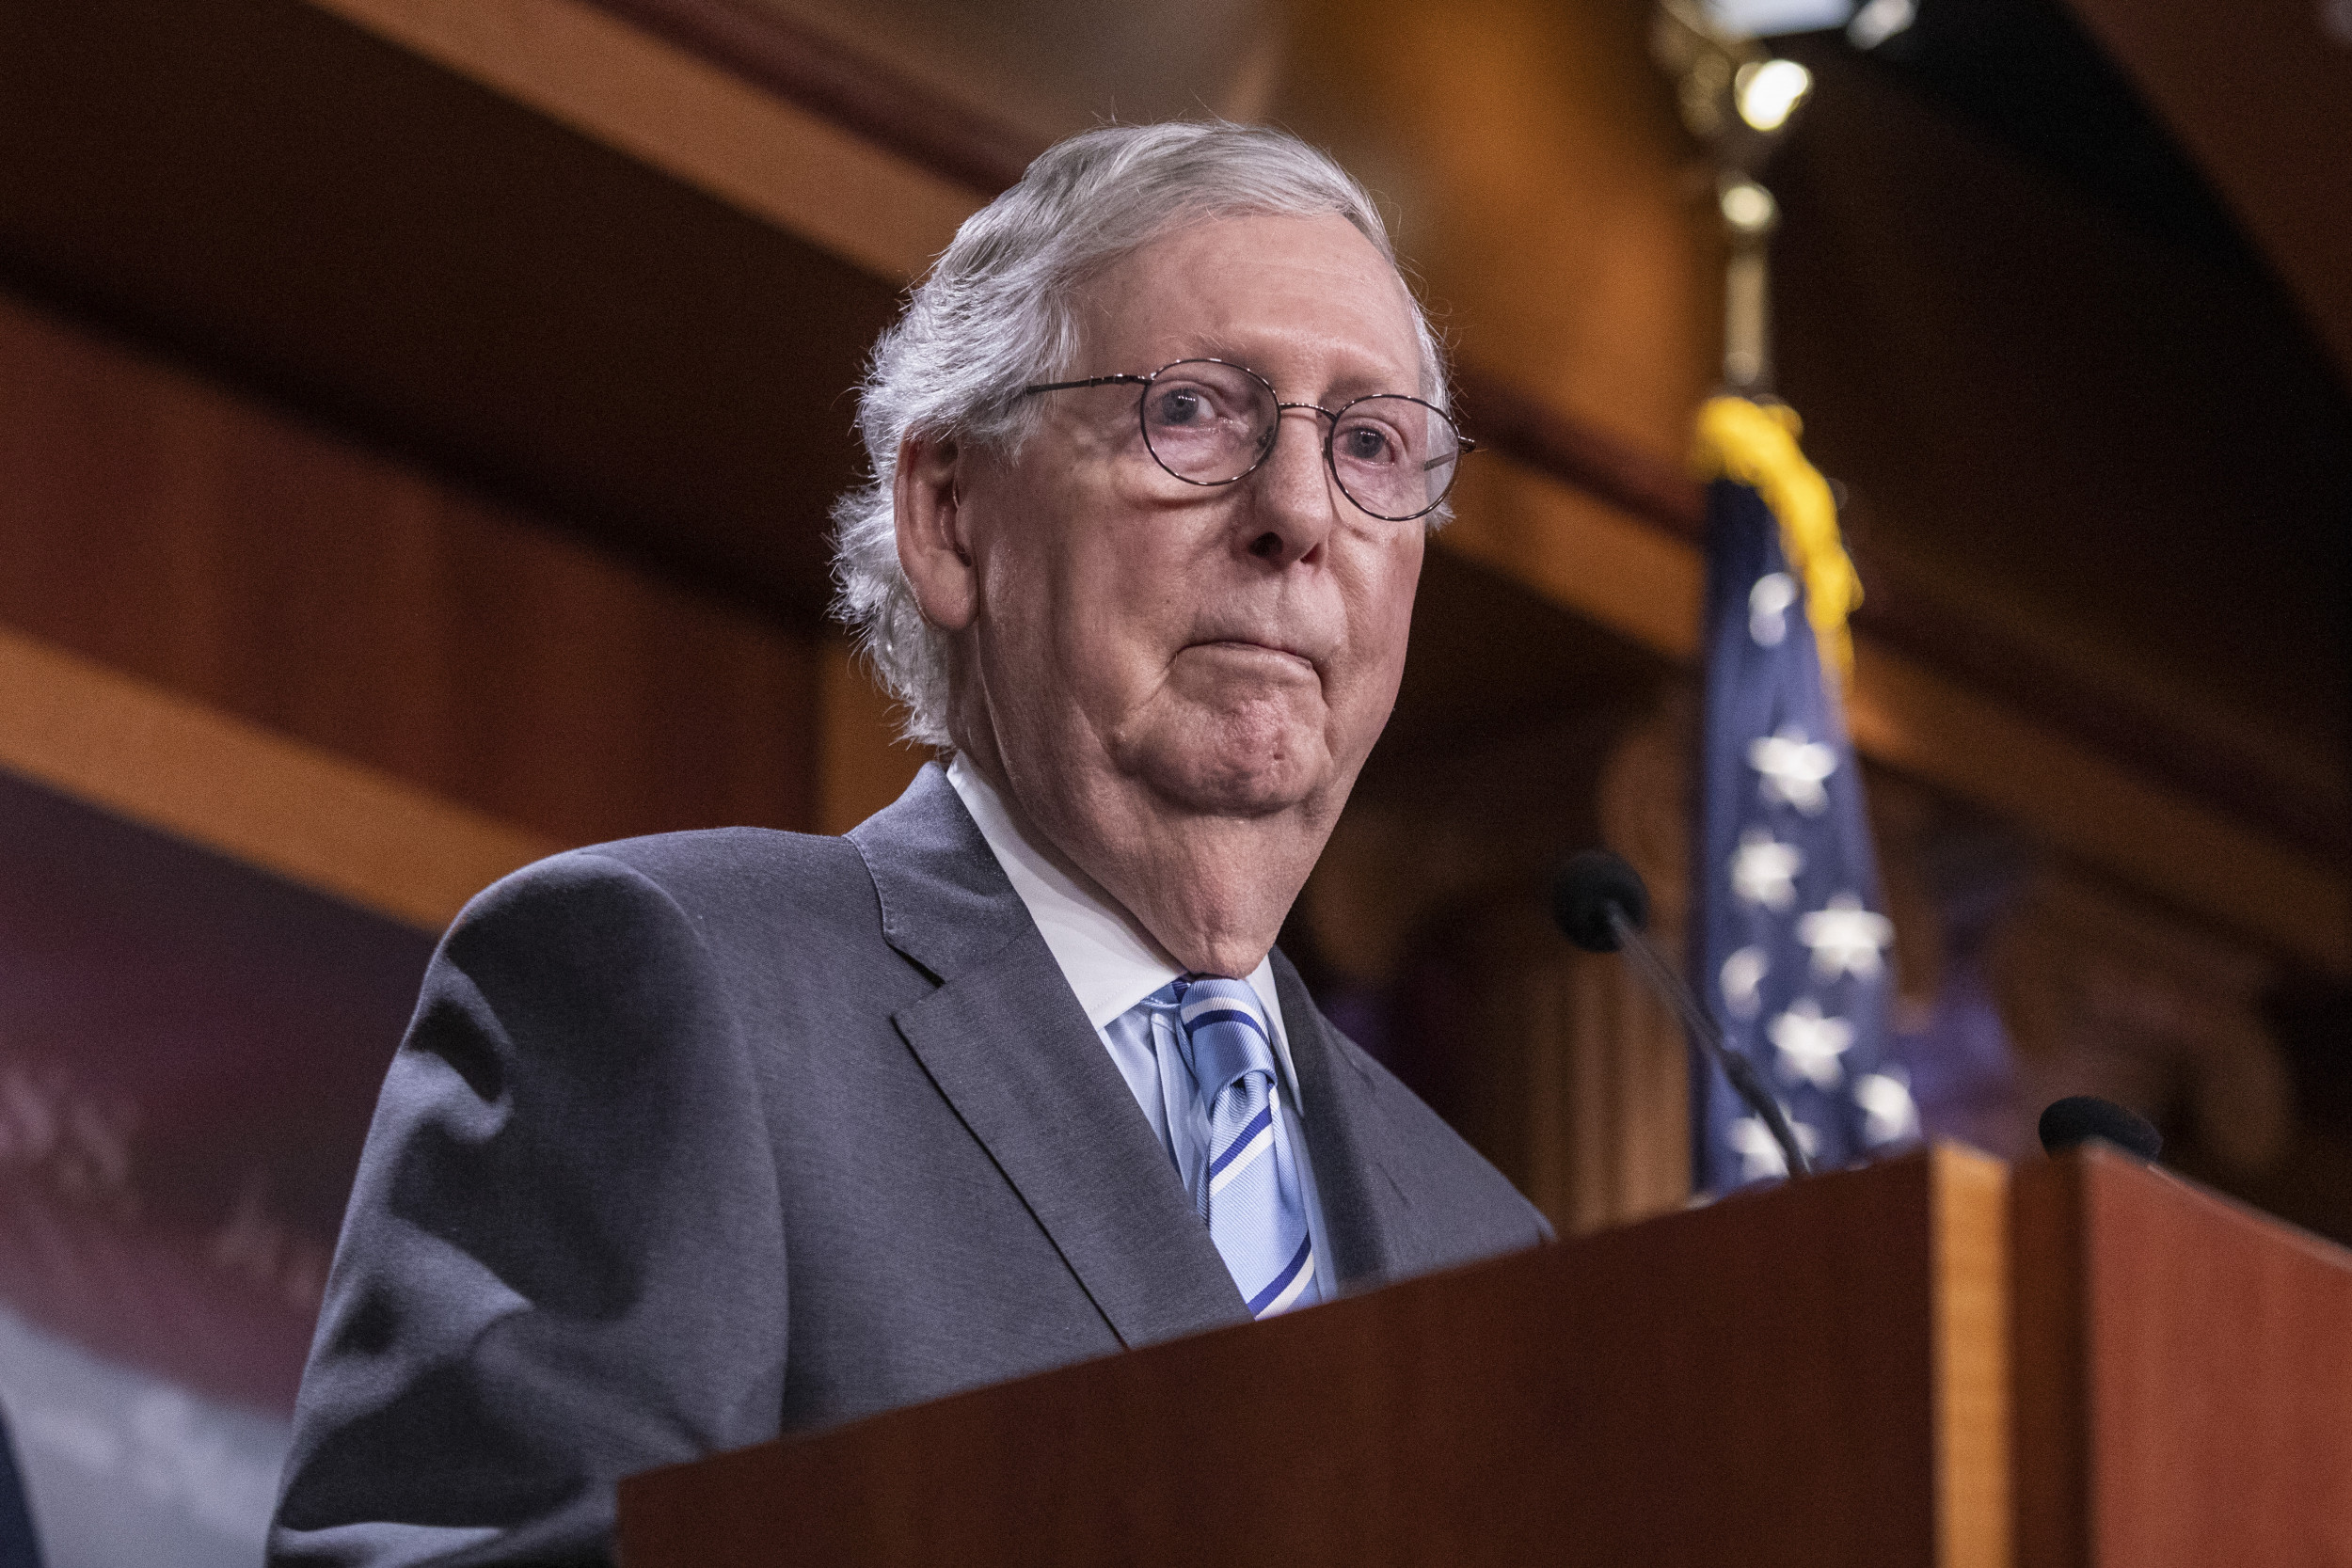 Senate minority leader Mitch McConnell (R-Ky) welcomed the Senate's decision to ratify Finland and Sweden's accession to NATO, saying, “Even closer cooperation with these partners will help us counter Russia and China.”